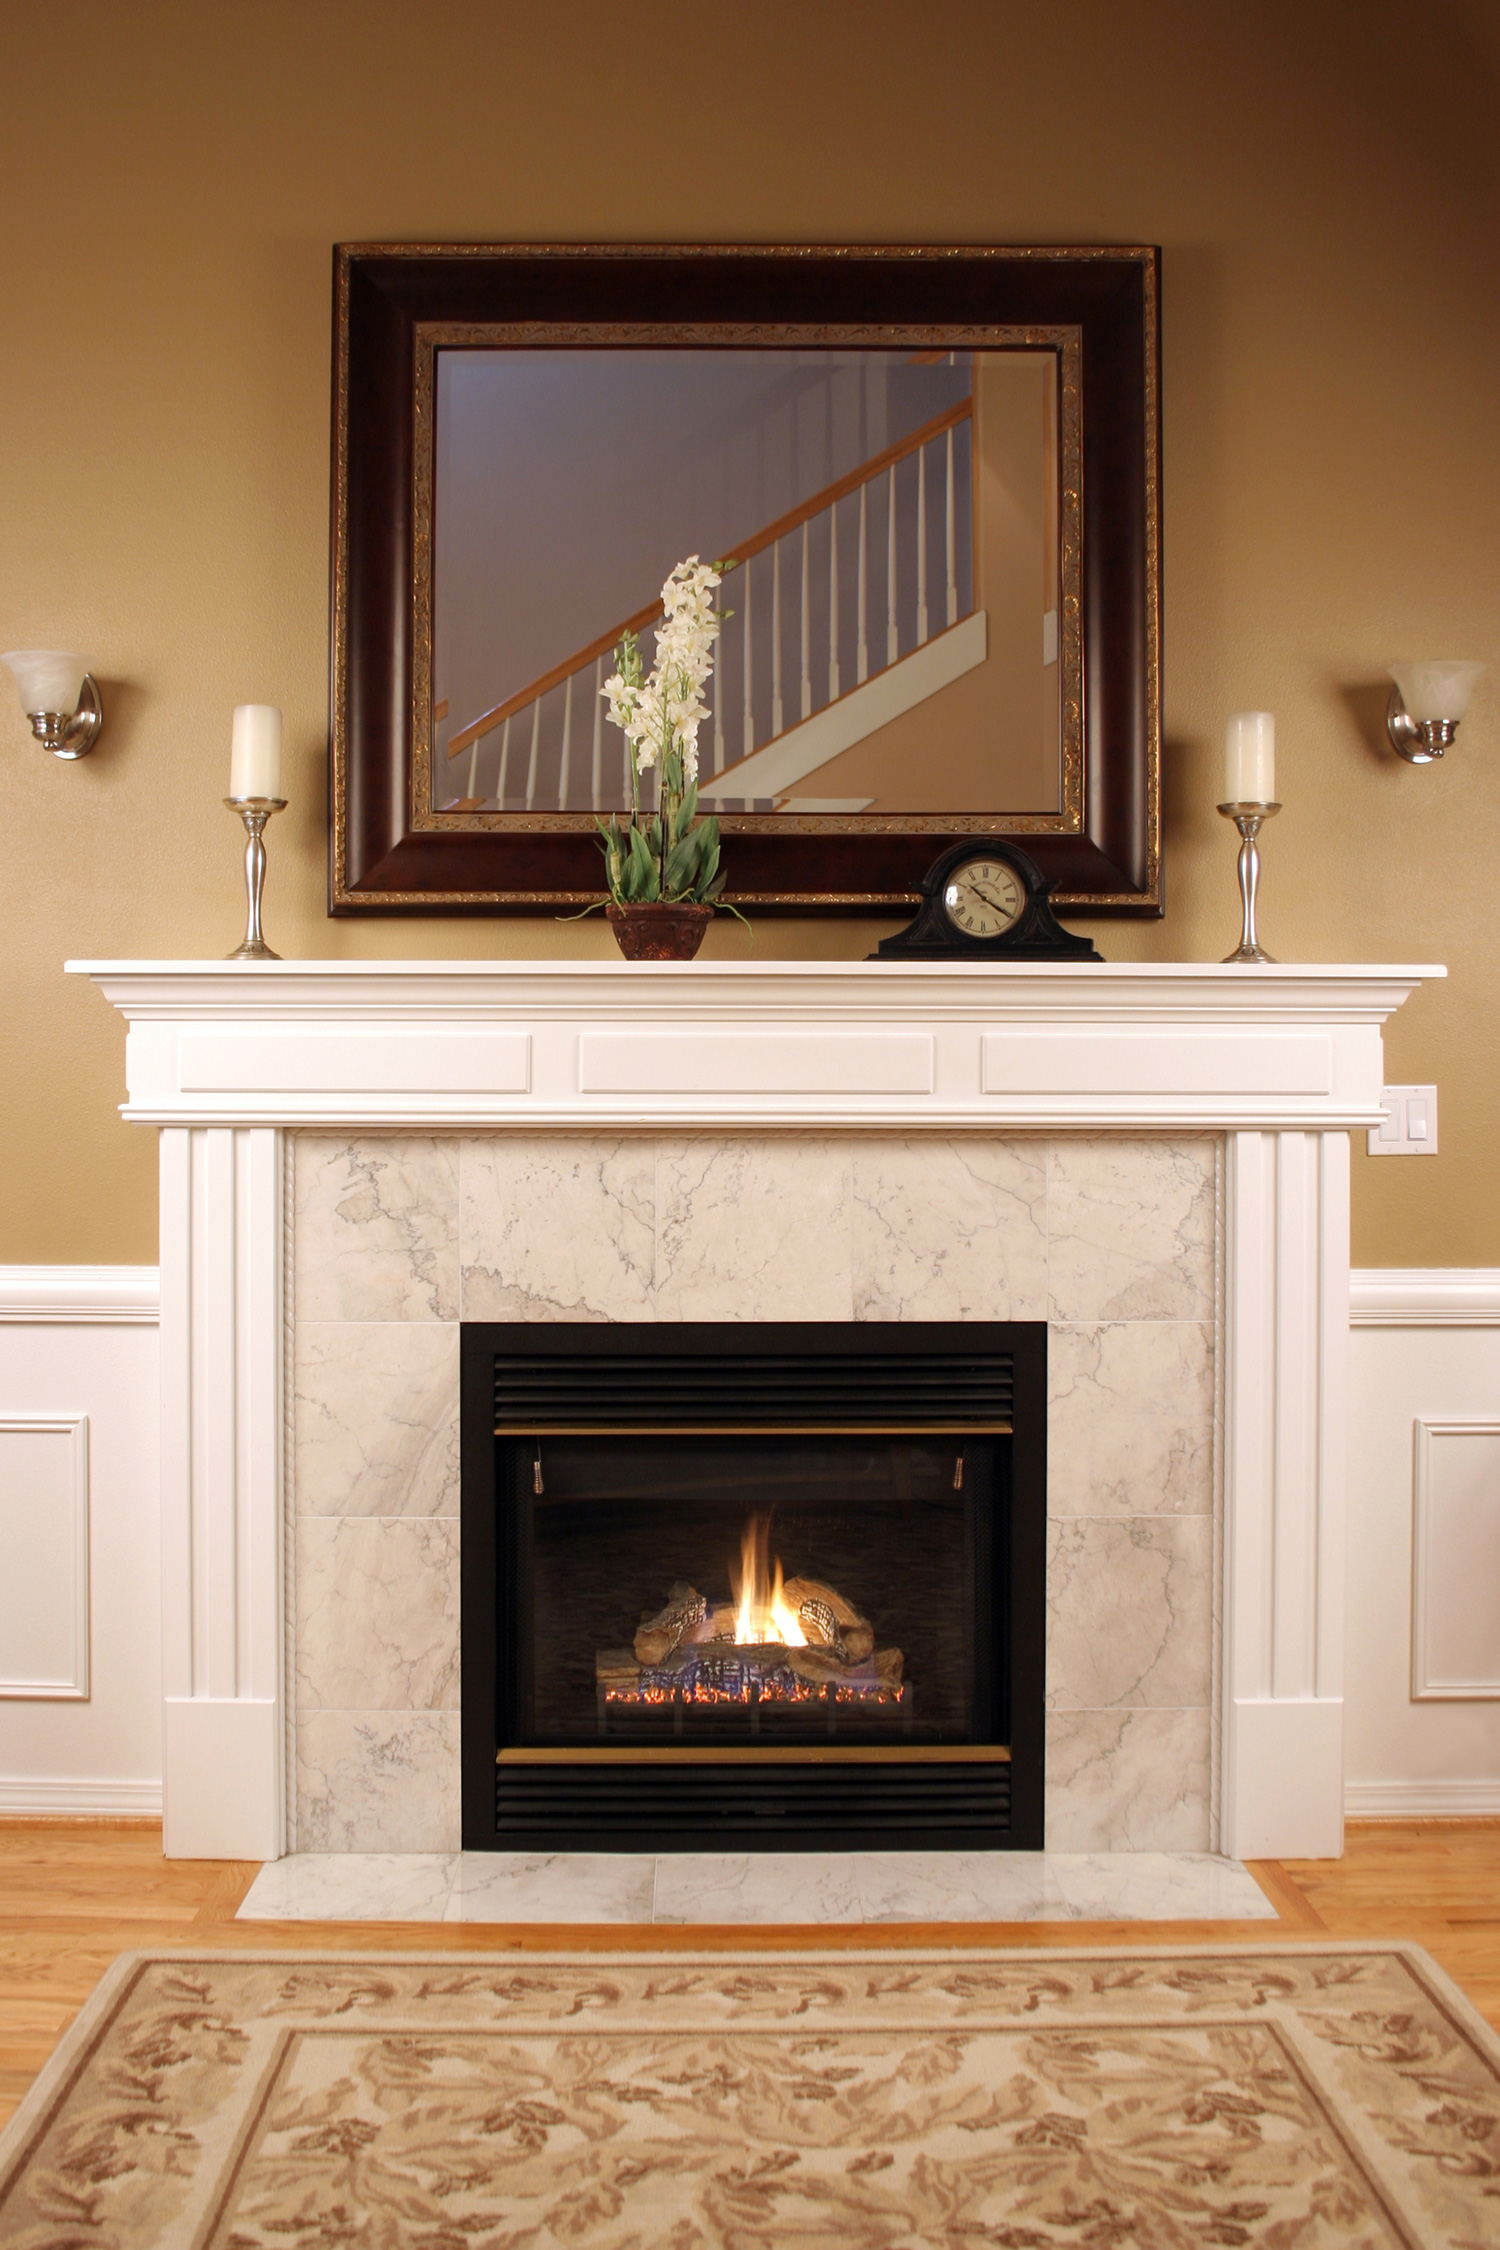 An interior shot of a marble fireplace with beautiful woodwork,a framed mirror and warm inviting colors.